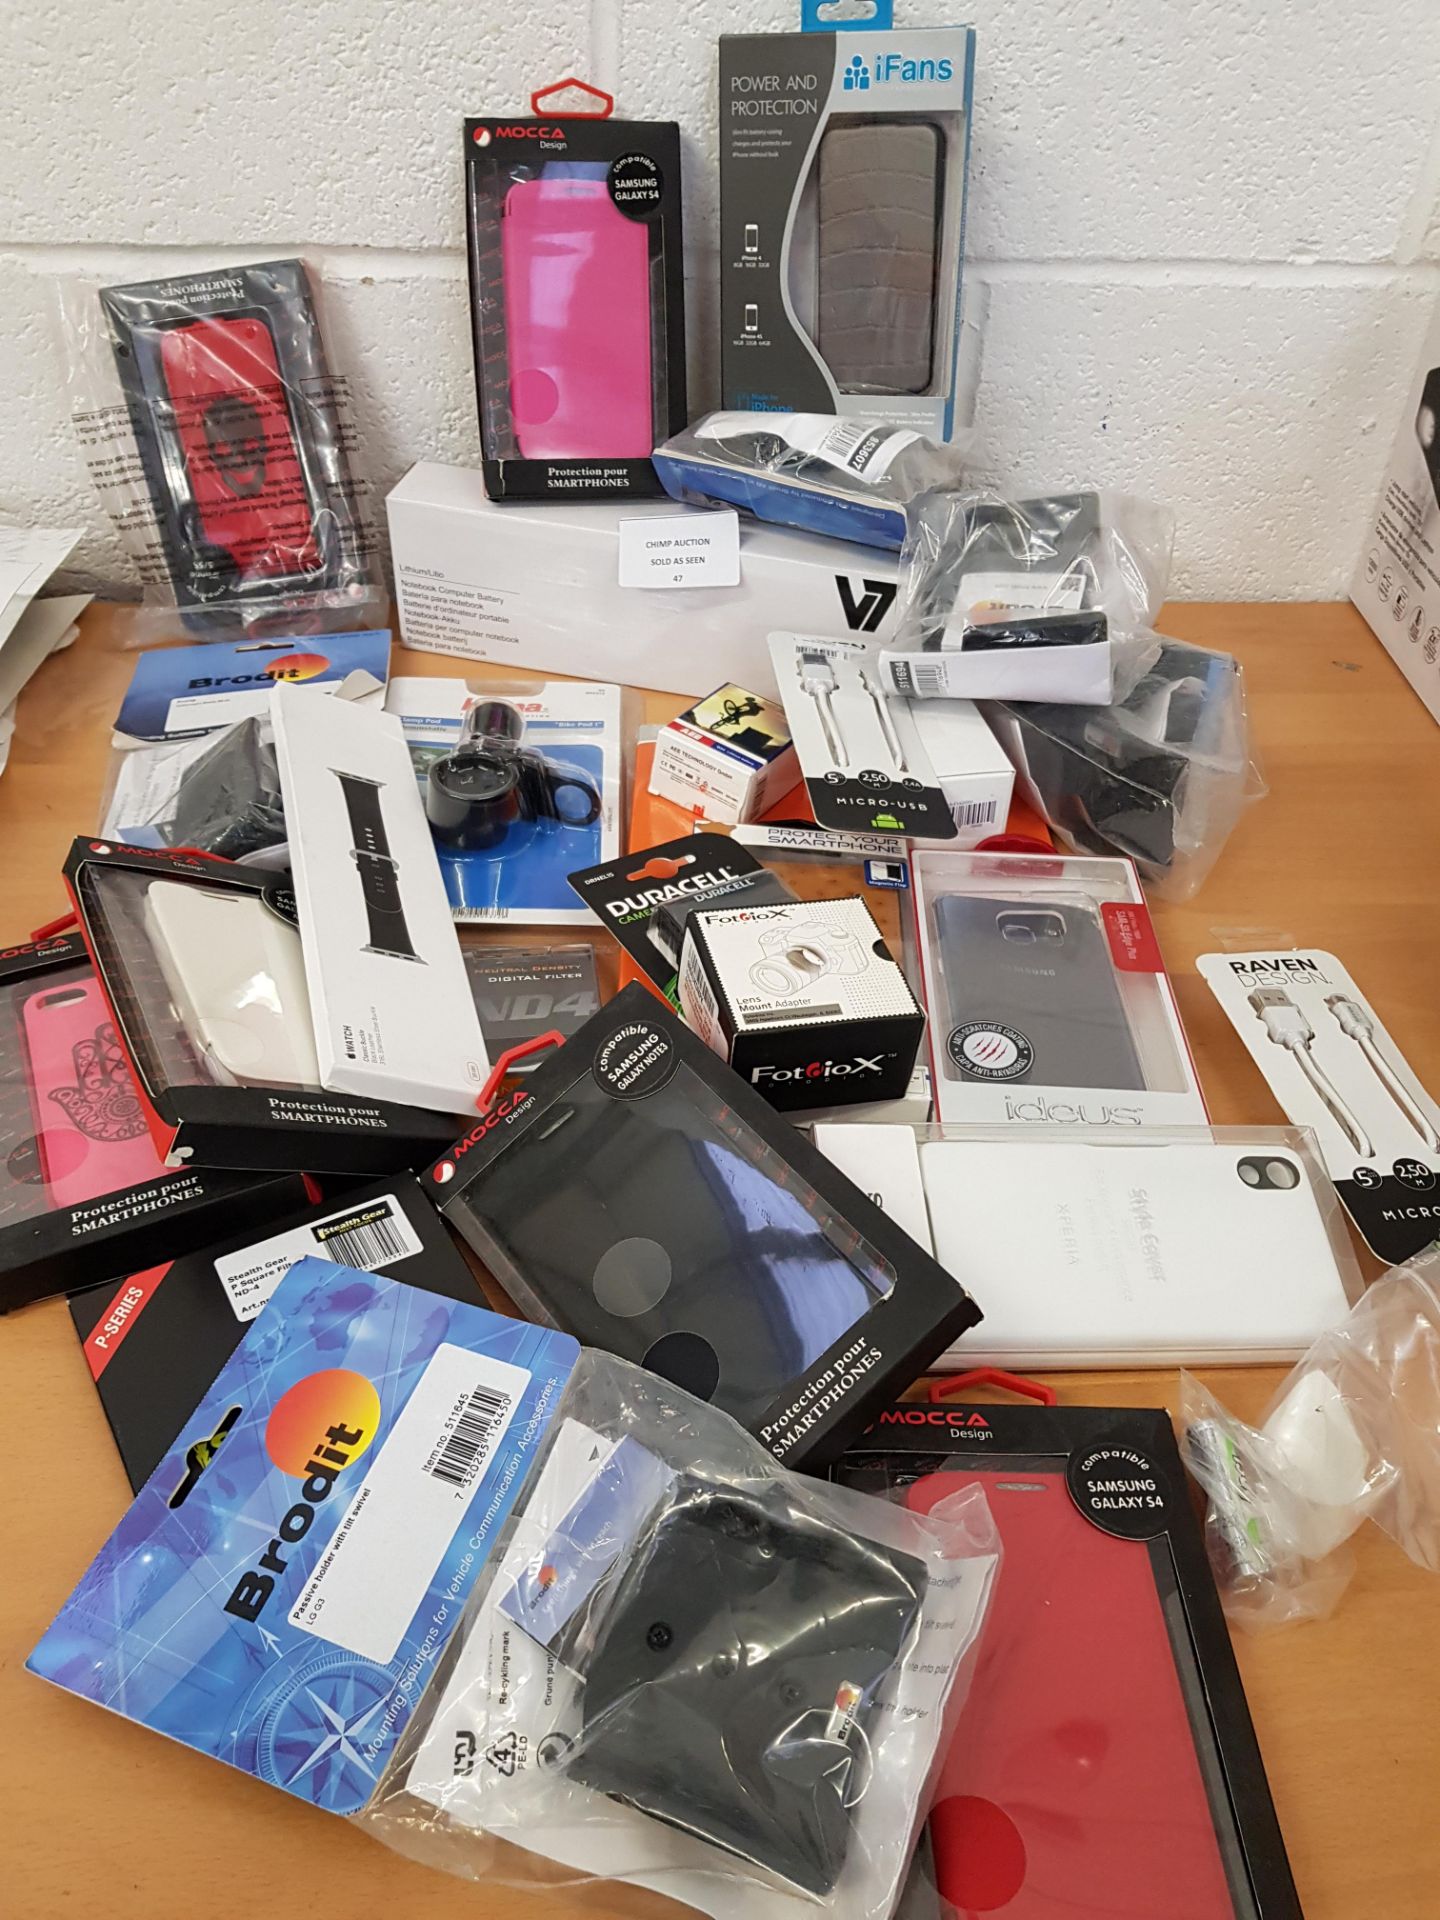 Joblot of mixed Brand new Phone, Tablet, PC peripherals